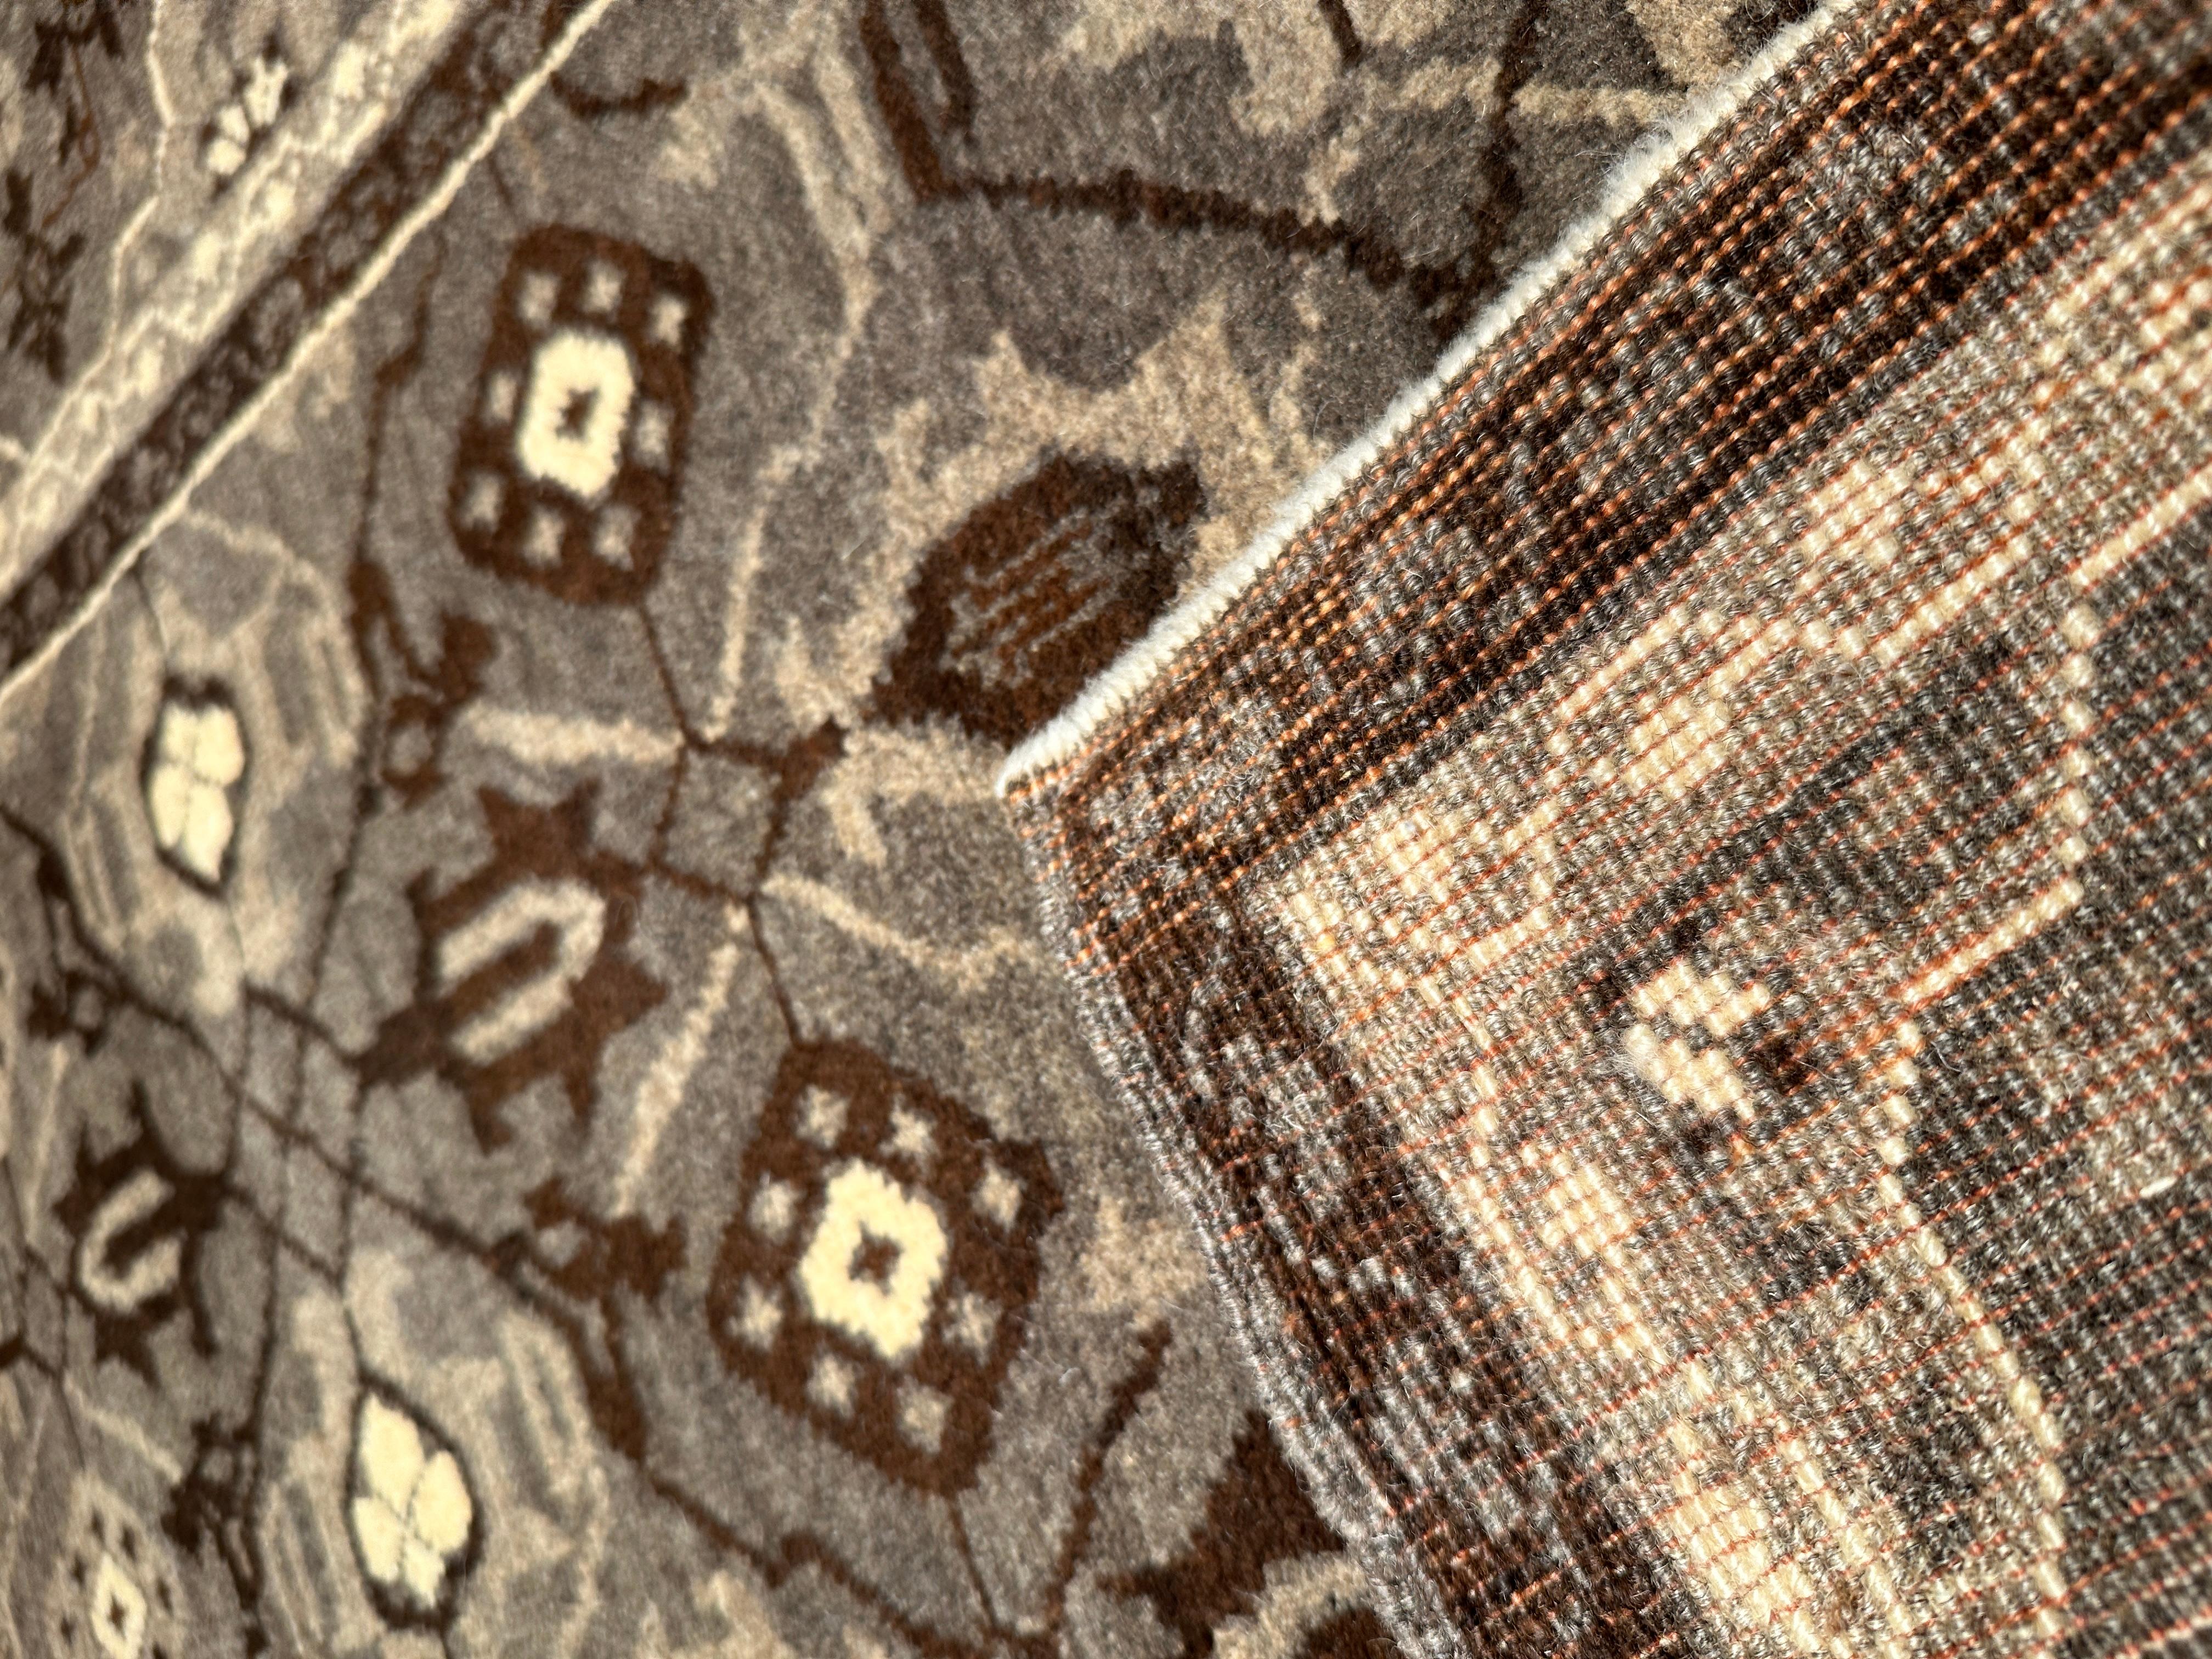 The source carpet comes from the Mercer Collection Sotheby’s 2000 (catalog cover). This Mamluk-Cairene carpet is known, curiously featuring some type of lattice was designed in the early 16th-century rug by Mamluk Sultane of Cairo, Egypt. This piece